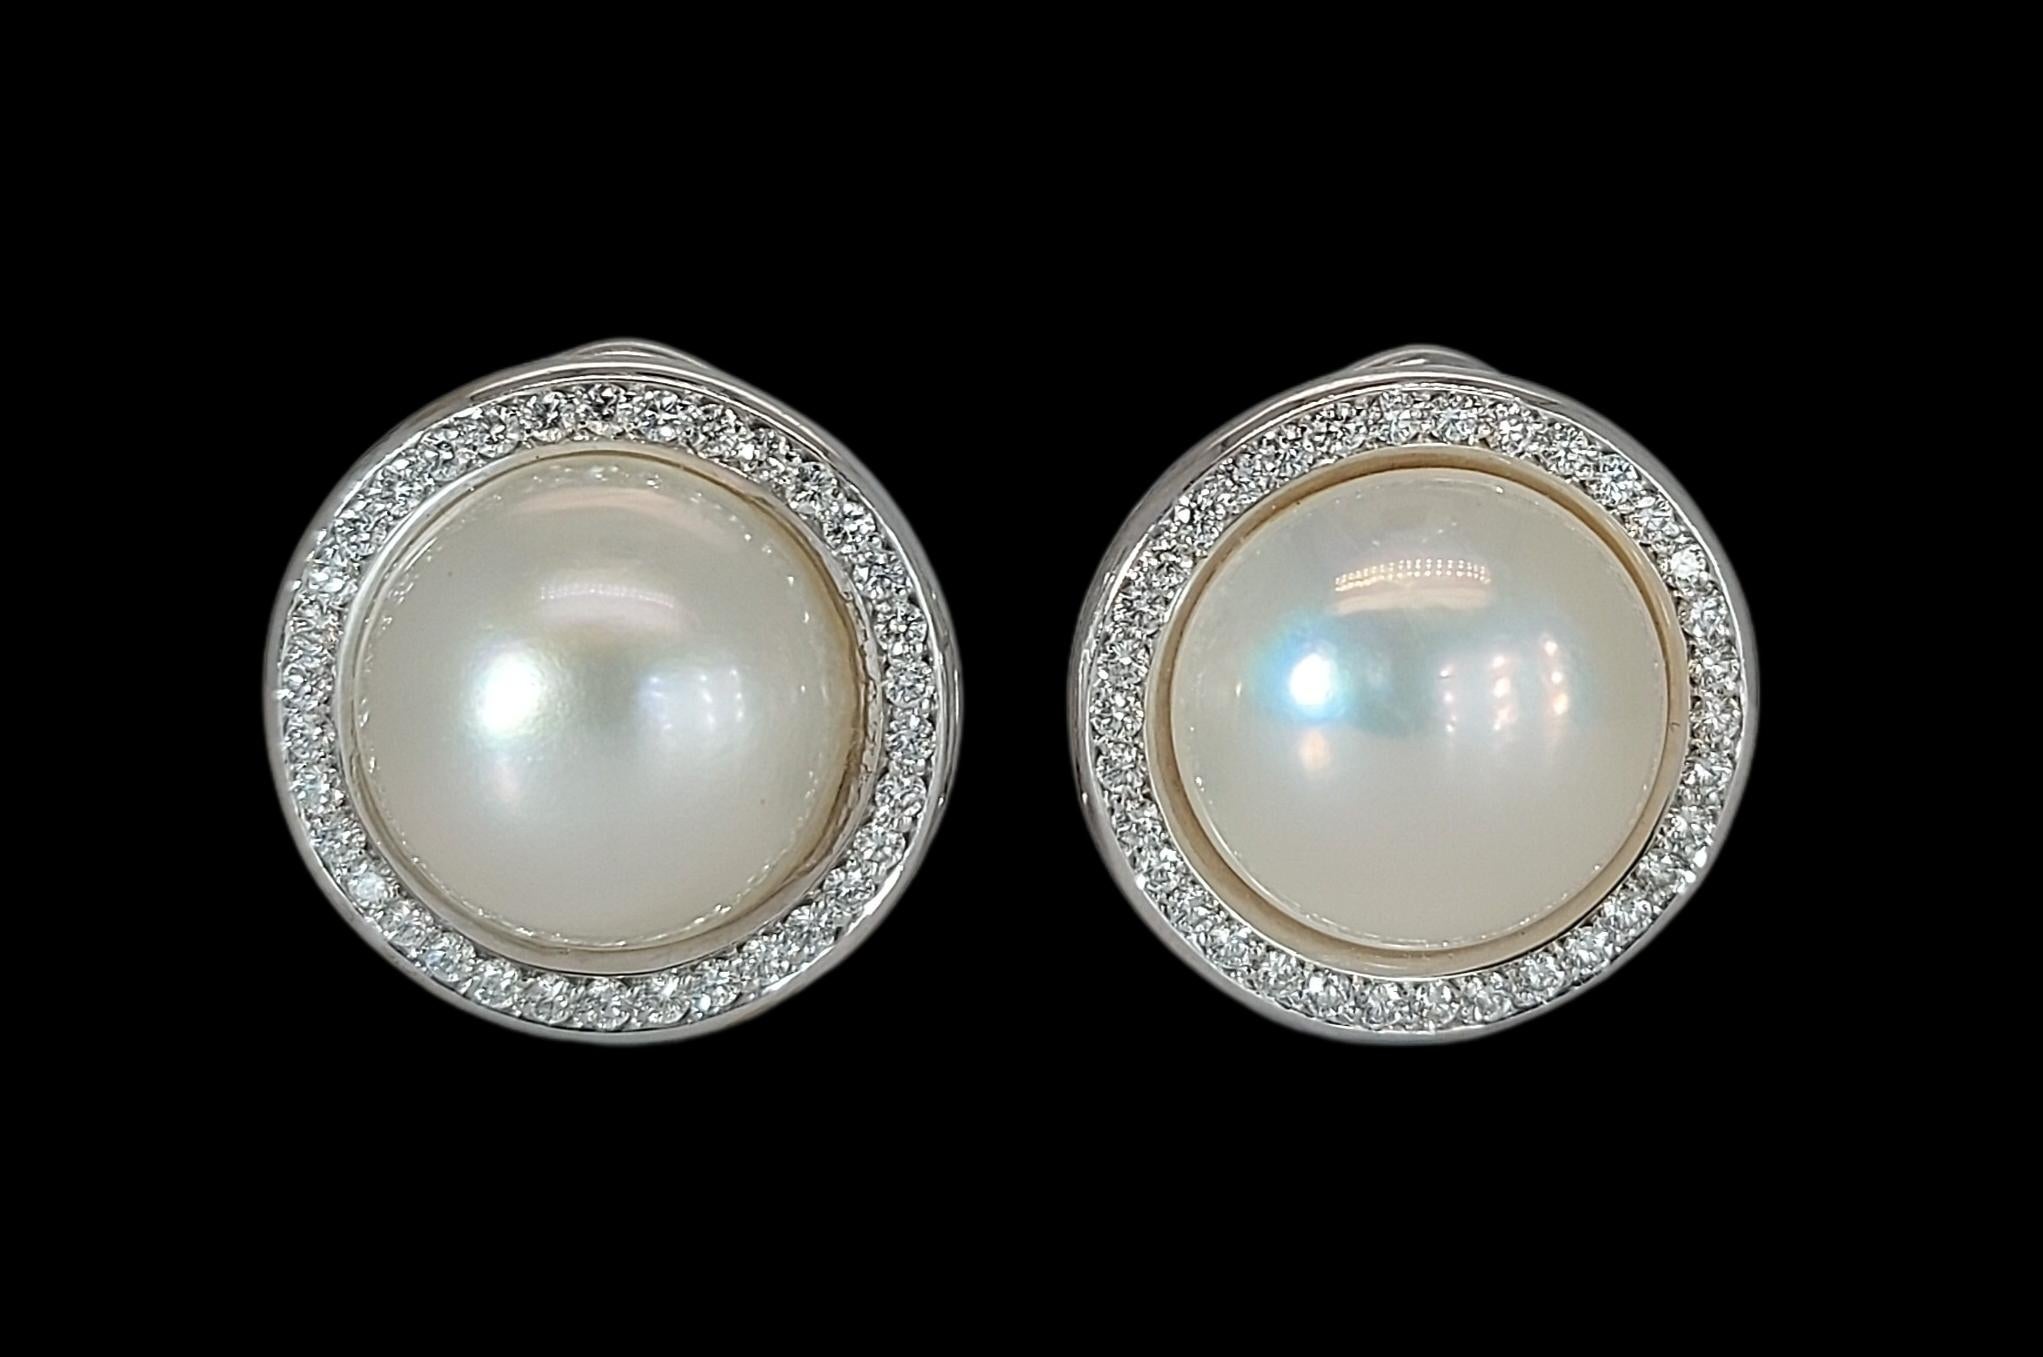 Gorgeous 18kt Round Mabe pearl Clip - On Earrings Surrounded With Diamonds

Diamonds: 64 brilliant cut diamonds 

Pearl: Mabe pearl with a of Diameter 13mm 

Material: 18kt White gold

Measurements: Diameter 18.3mm x 21mm

Total weight: 14.2 gram /